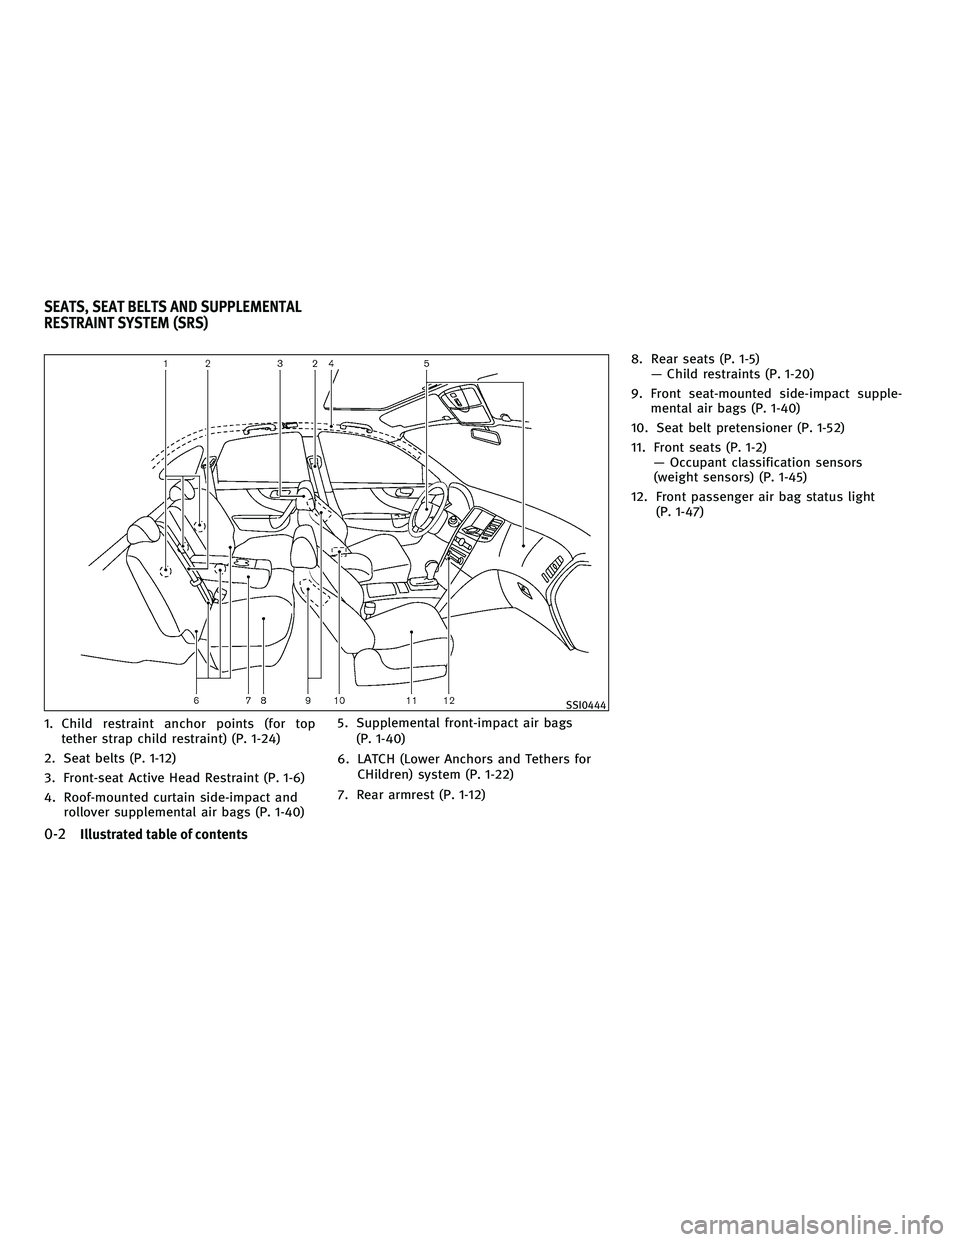 INFINITI FX 2010  Owners Manual 1. Child restraint anchor points (for toptether strap child restraint) (P. 1-24)
2. Seat belts (P. 1-12)
3. Front-seat Active Head Restraint (P. 1-6)
4. Roof-mounted curtain side-impact and rollover s